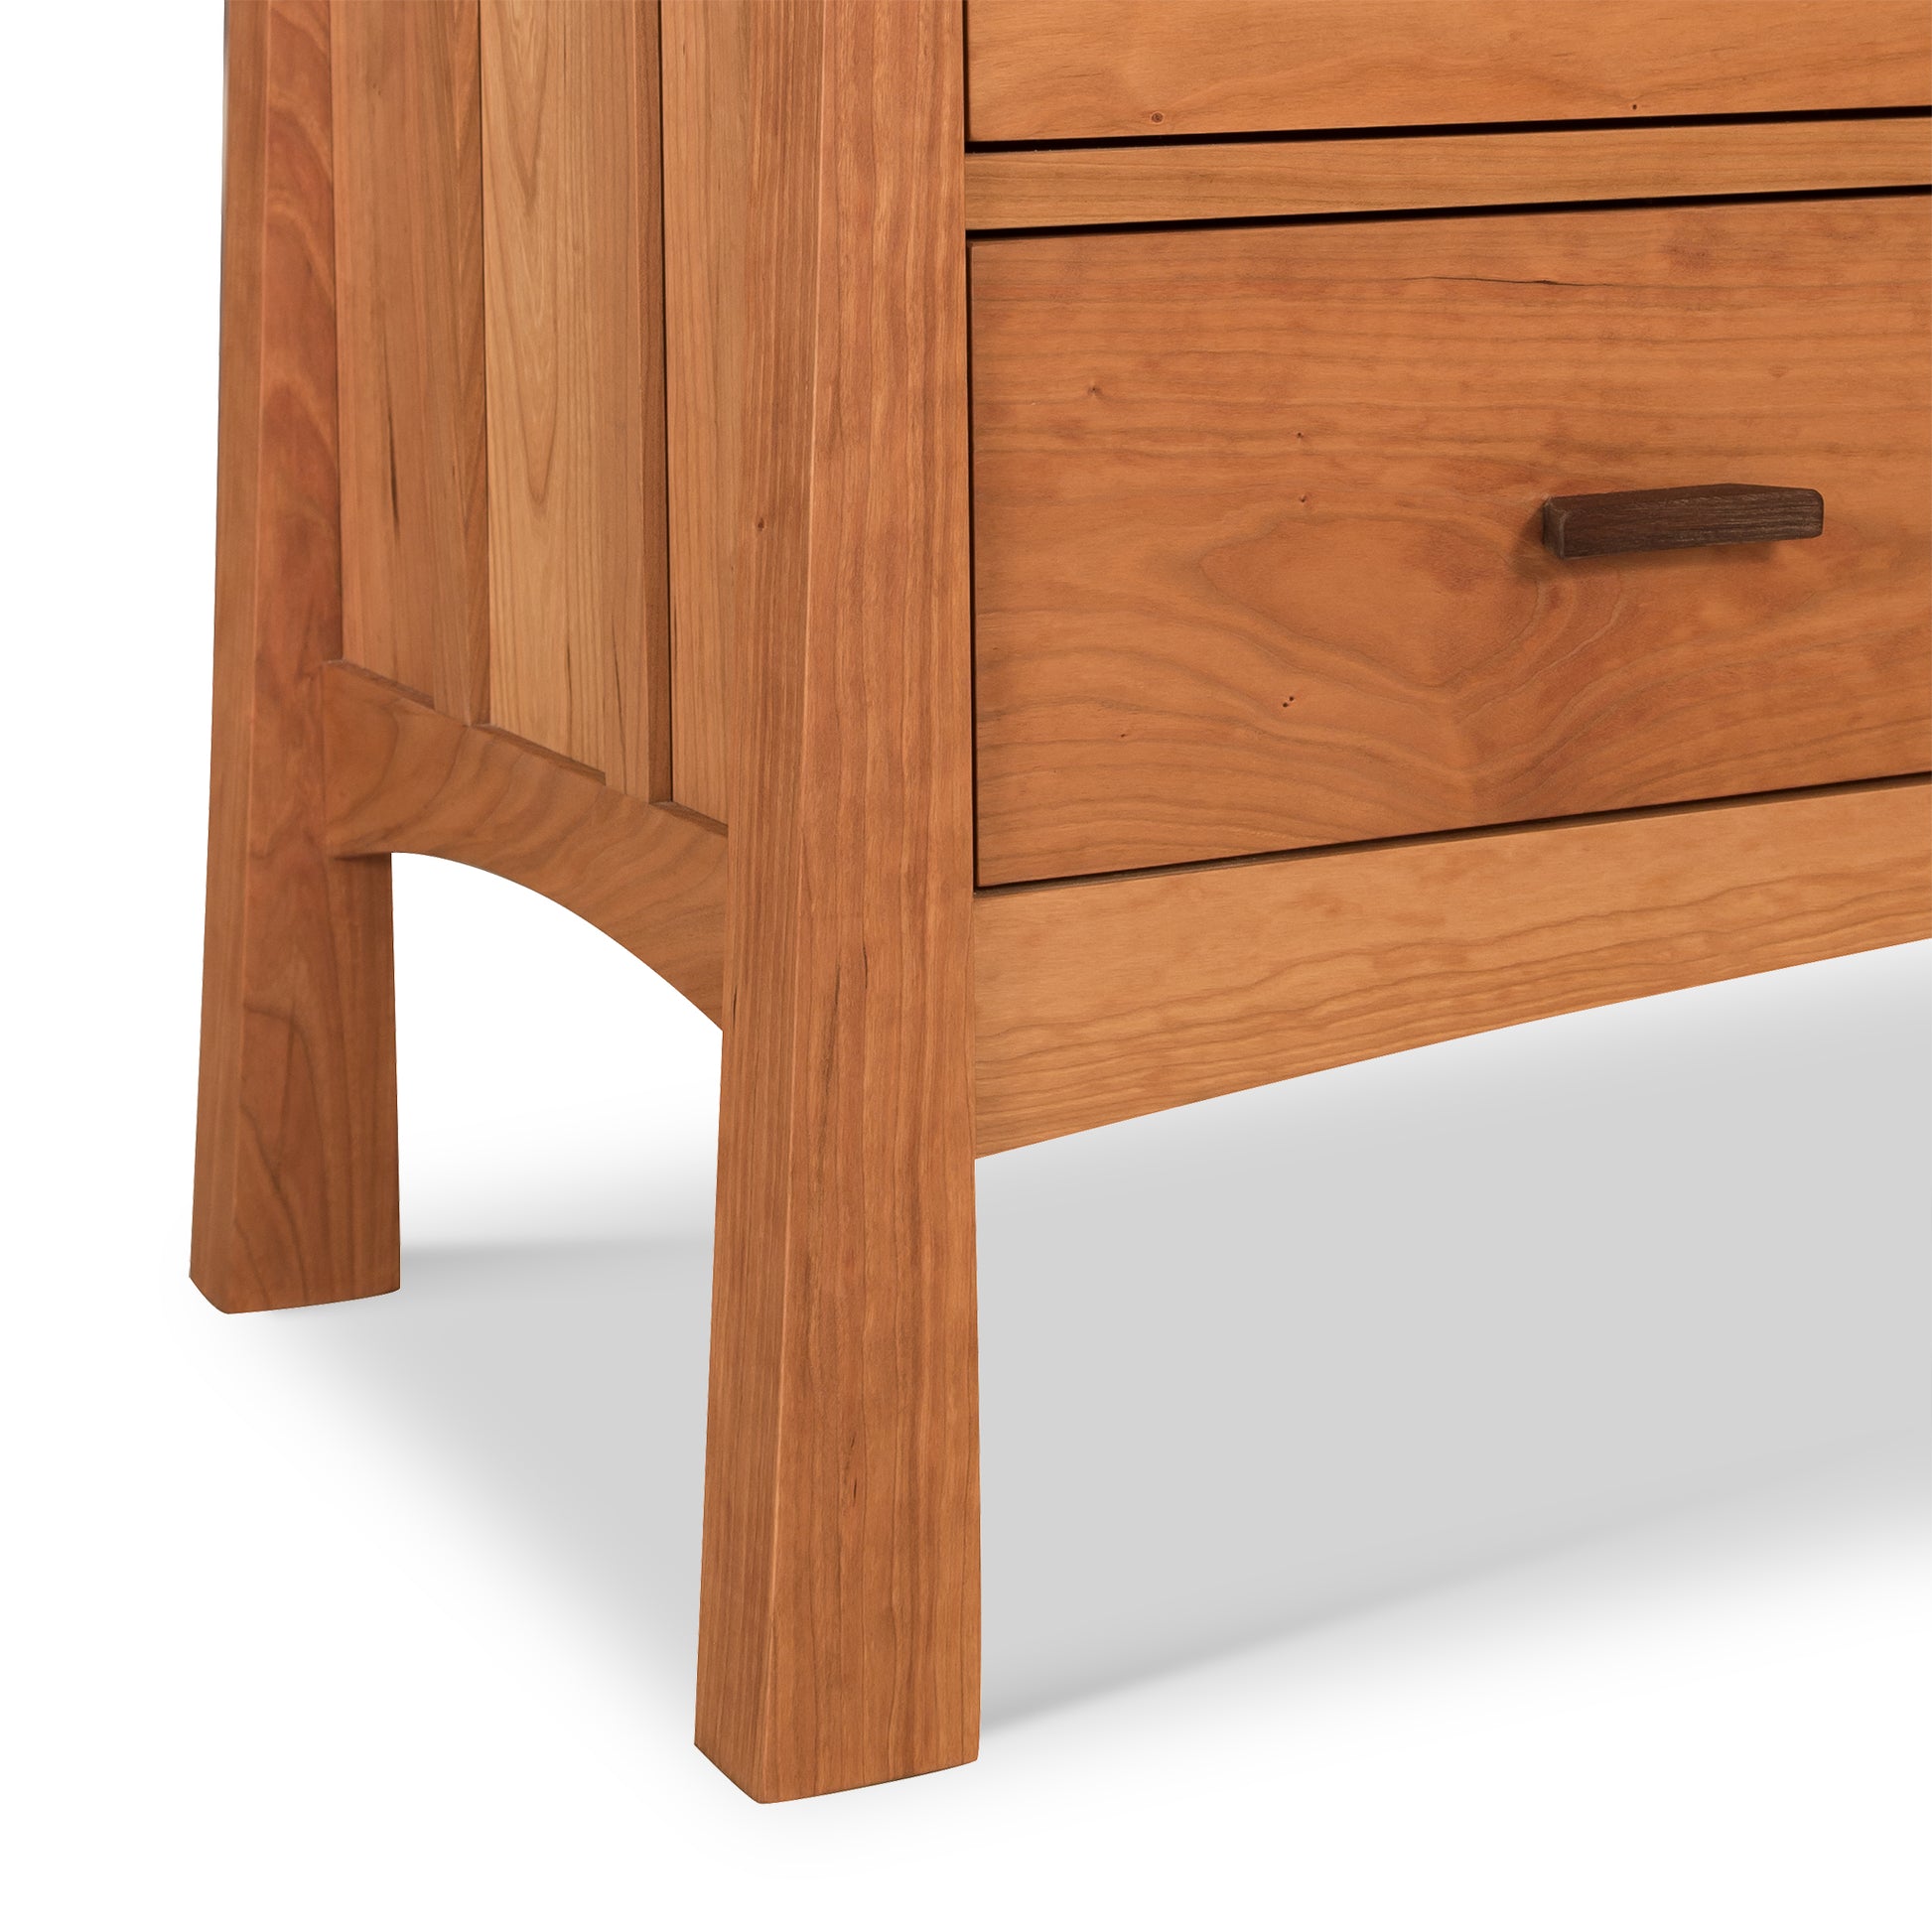 Contemporary Craftsman 4-Drawer Chest wooden nightstand with a single drawer featuring a simple pull handle, pictured against an isolated background by Vermont Furniture Designs.